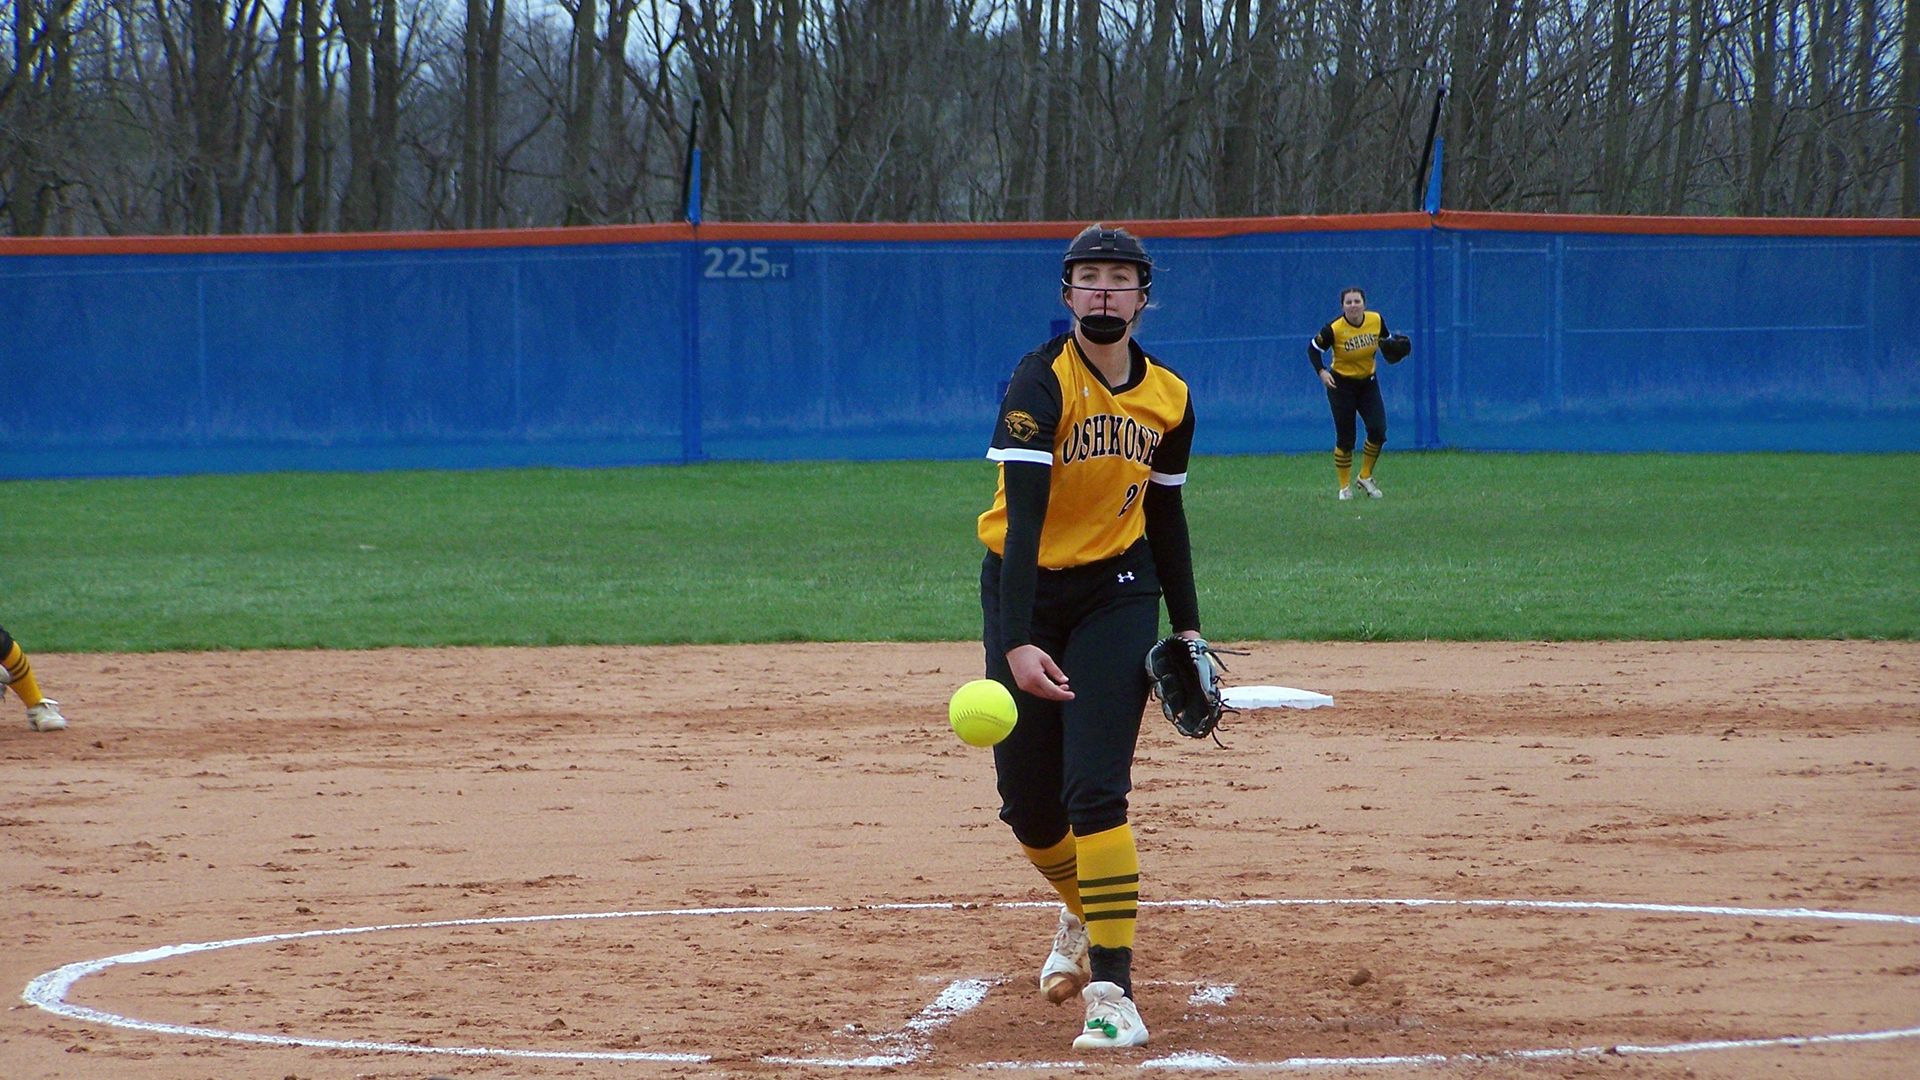 Maddie Fink pitched a five-inning, three-hit shutout during UW-Oshkosh's 11-0 win over UW-Platteville in the opener.